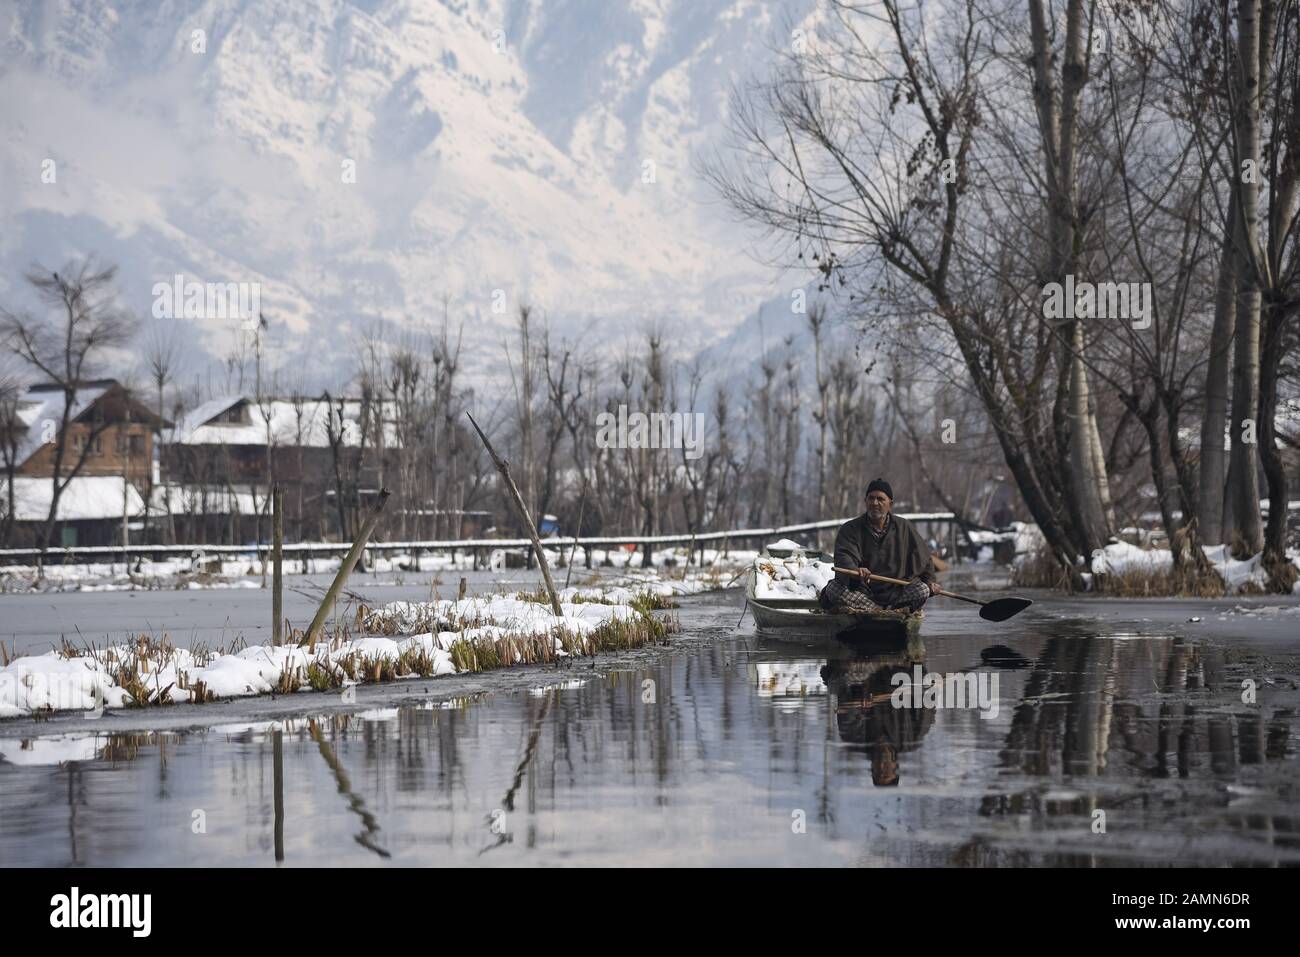 A Kashmiri boatman rows his boat on Dal Lake after fresh snowfall in Srinagar.Due to heavy snowfall in the last 48 hours, there have been multiple avalanches in which at least 4 Indian army soldiers and 5 civilians Killed in the Indian administered Kashmir. Stock Photo